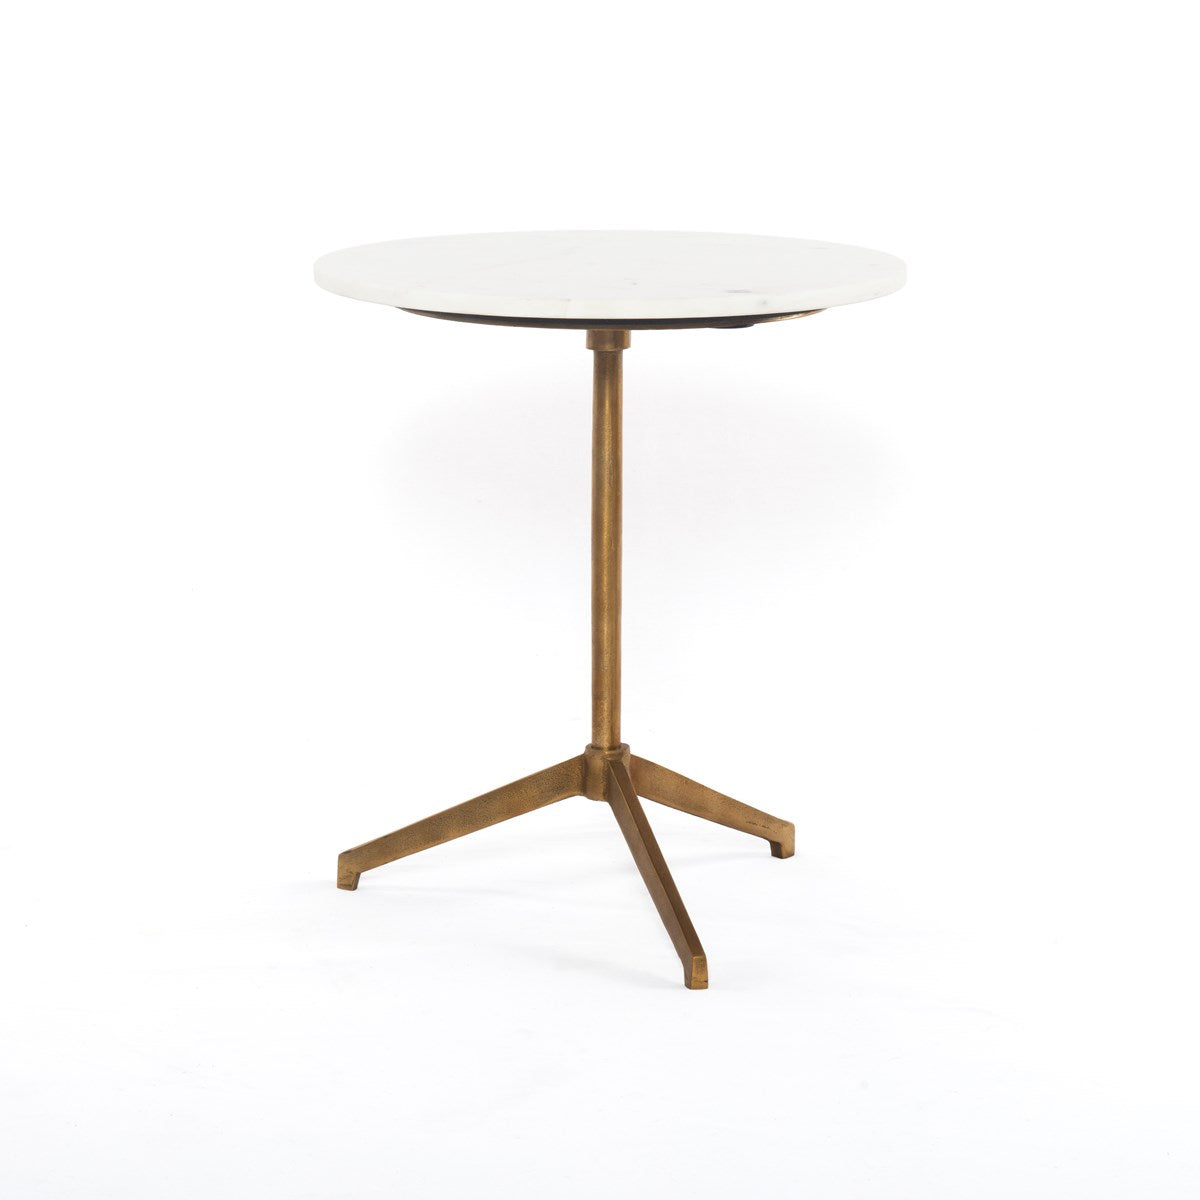 Load image into Gallery viewer, Helen End Table End Table Four Hands     Four Hands, Burke Decor, Mid Century Modern Furniture, Old Bones Furniture Company, Old Bones Co, Modern Mid Century, Designer Furniture, https://www.oldbonesco.com/
